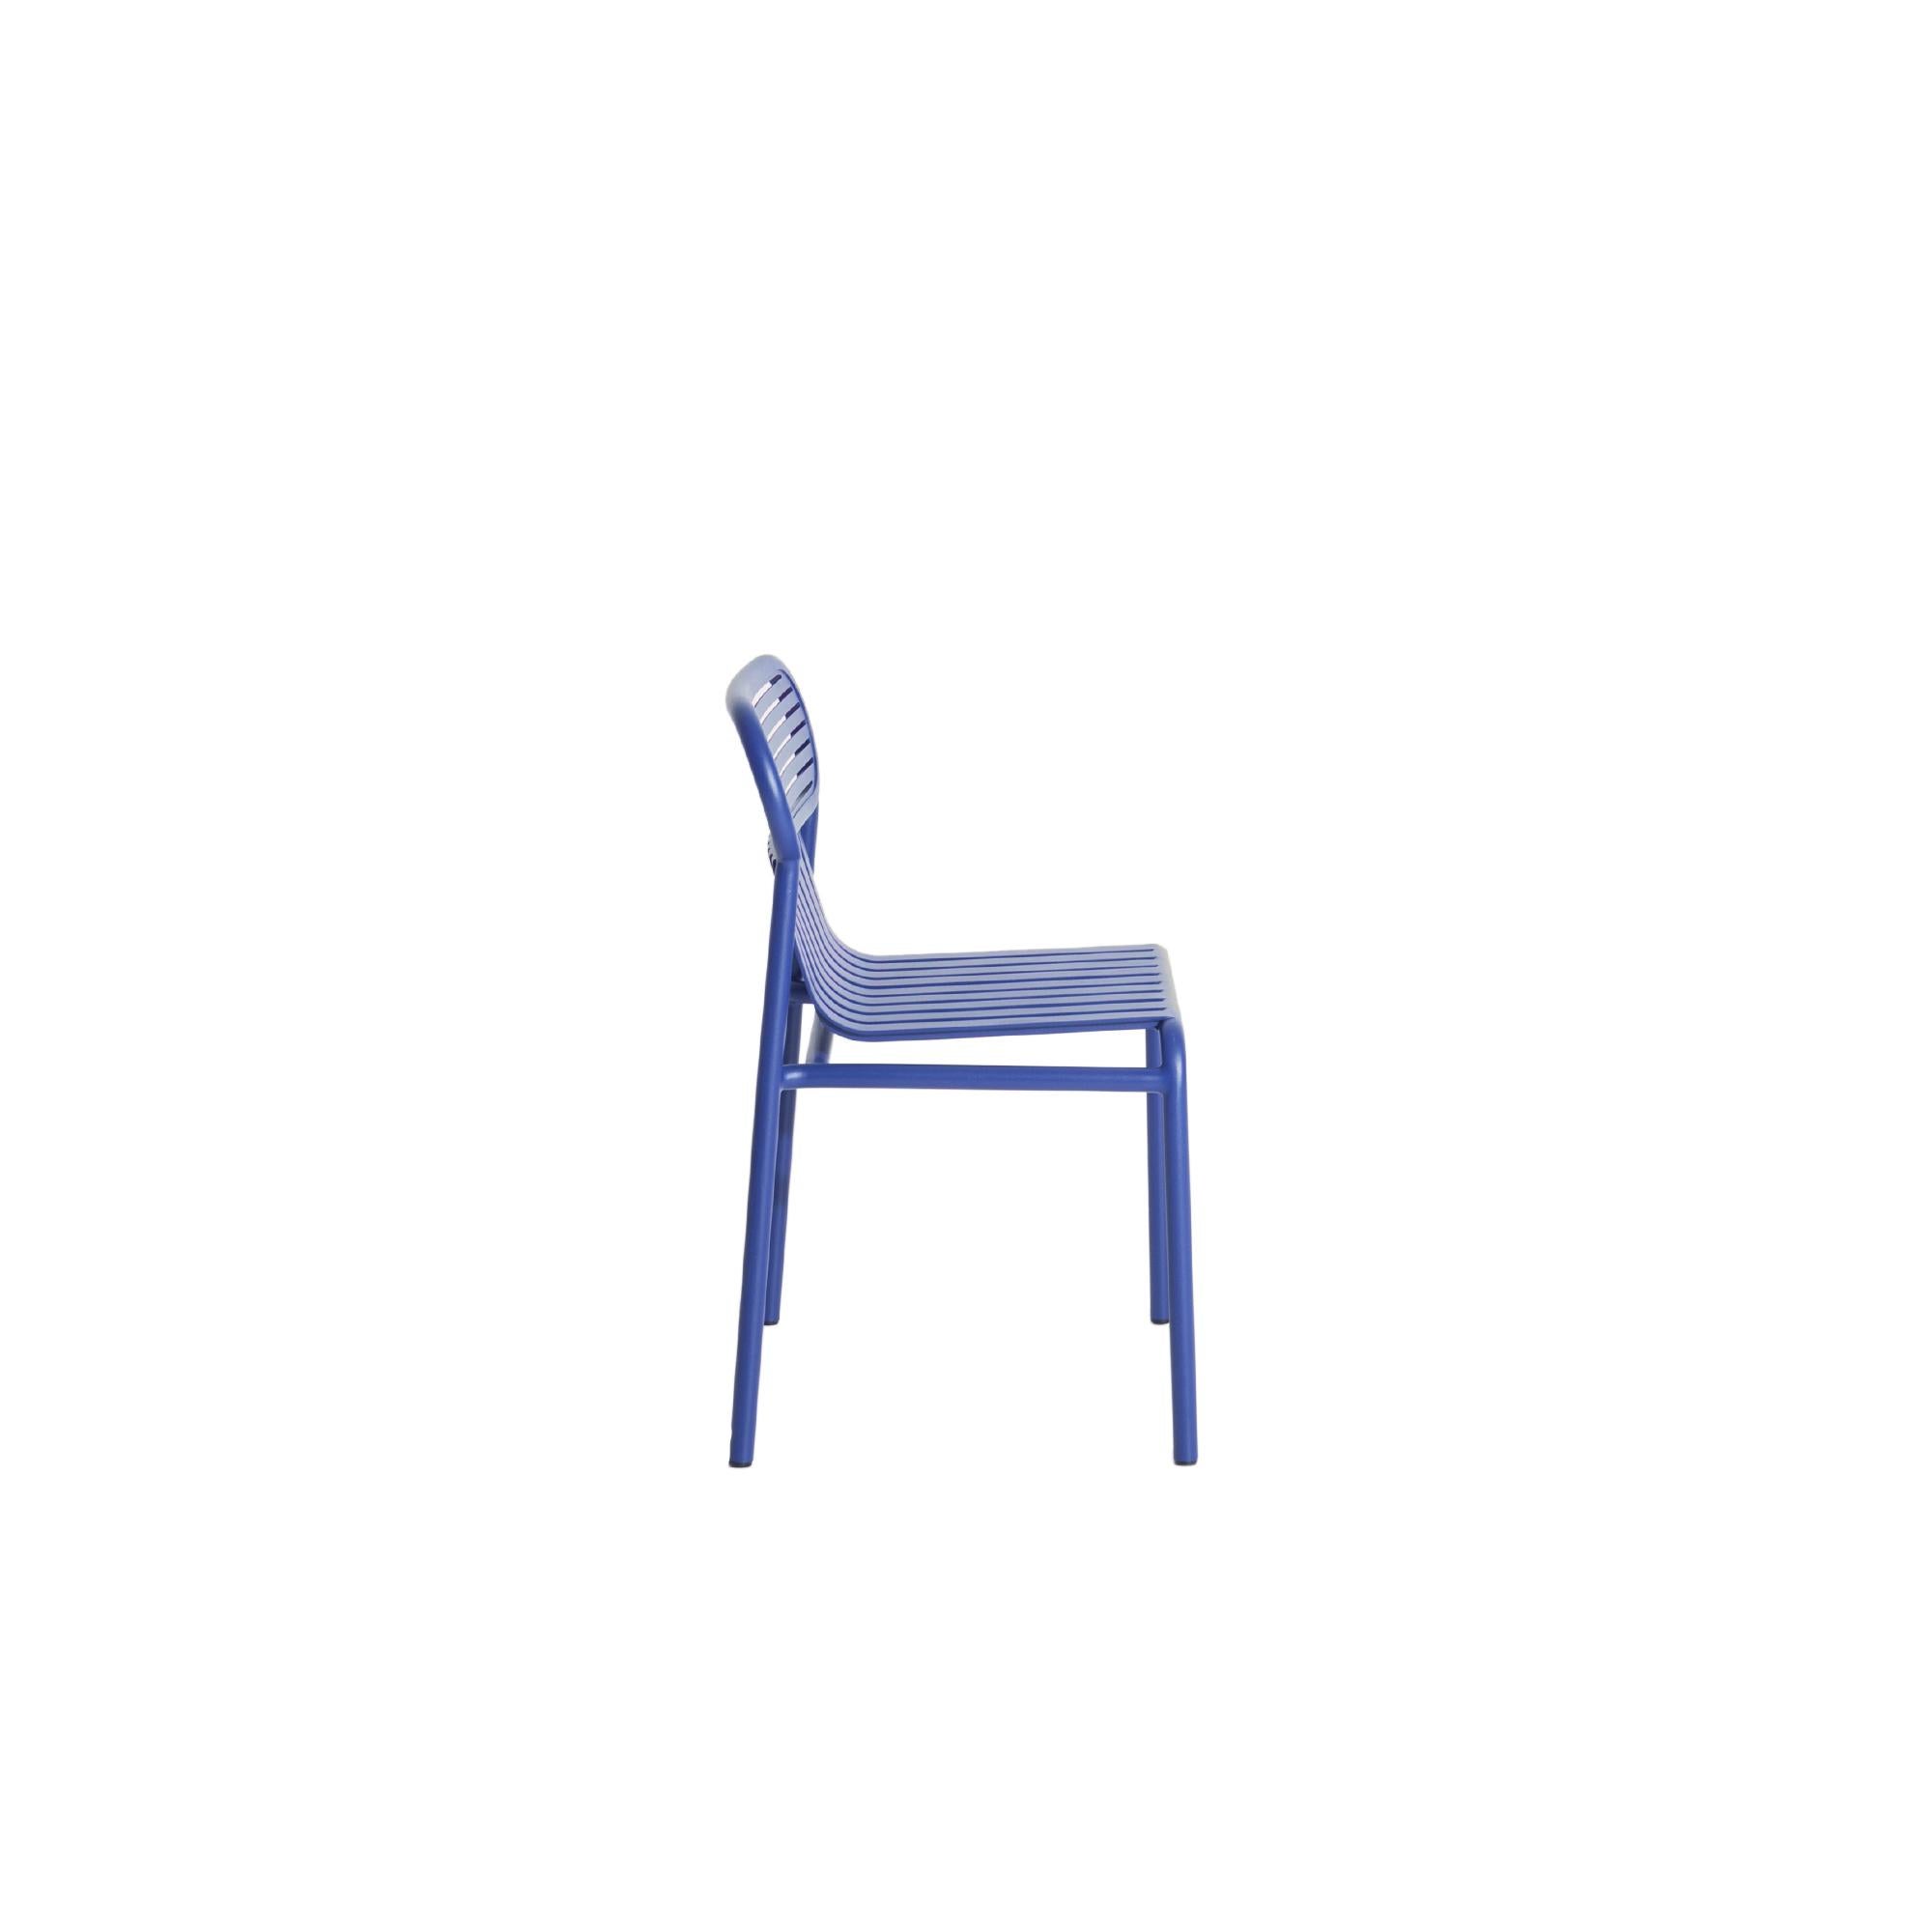 Chinese Petite Friture Week-End Chair in Blue Aluminium by Studio BrichetZiegler For Sale